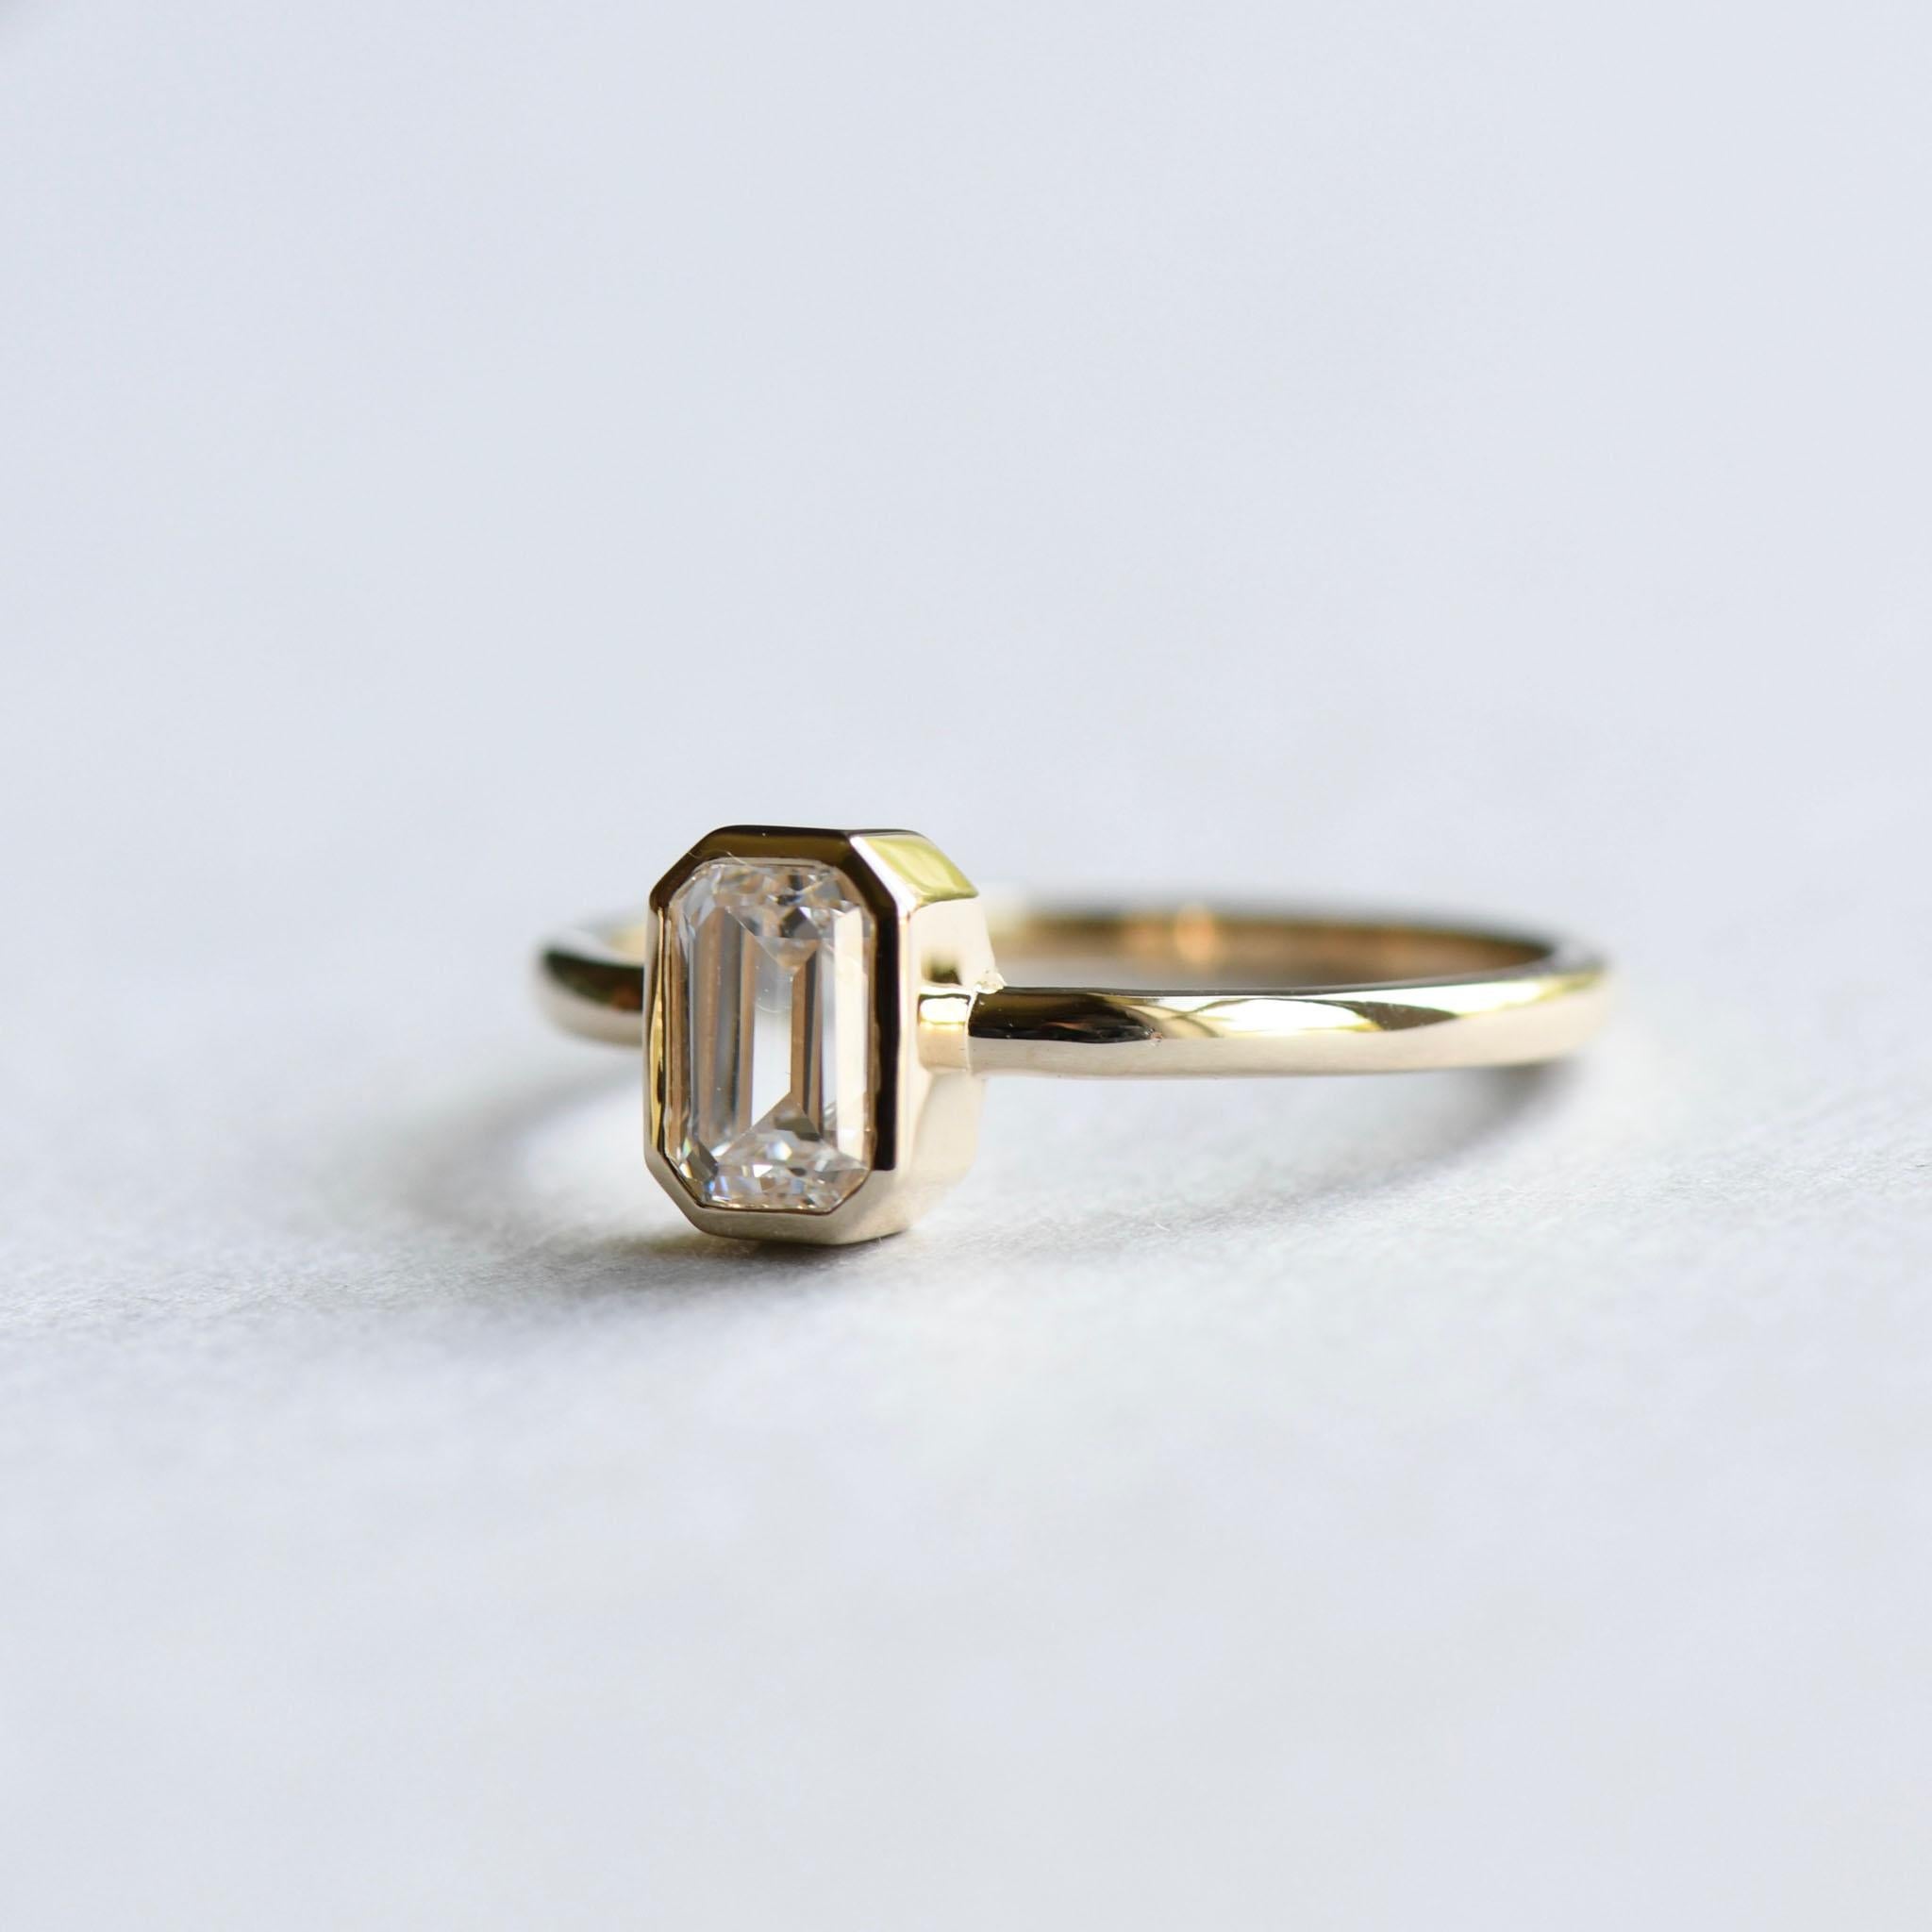 Bezel set emerald cut moissanite engagement ring set on 18 karat yellow gold. 
Stone: Moissanite Forever One by Charles and Colvard and each stone comes with an authenticity/warranty card
Stone Shape: Emerald
Cut: Step cut
Color: Colorless